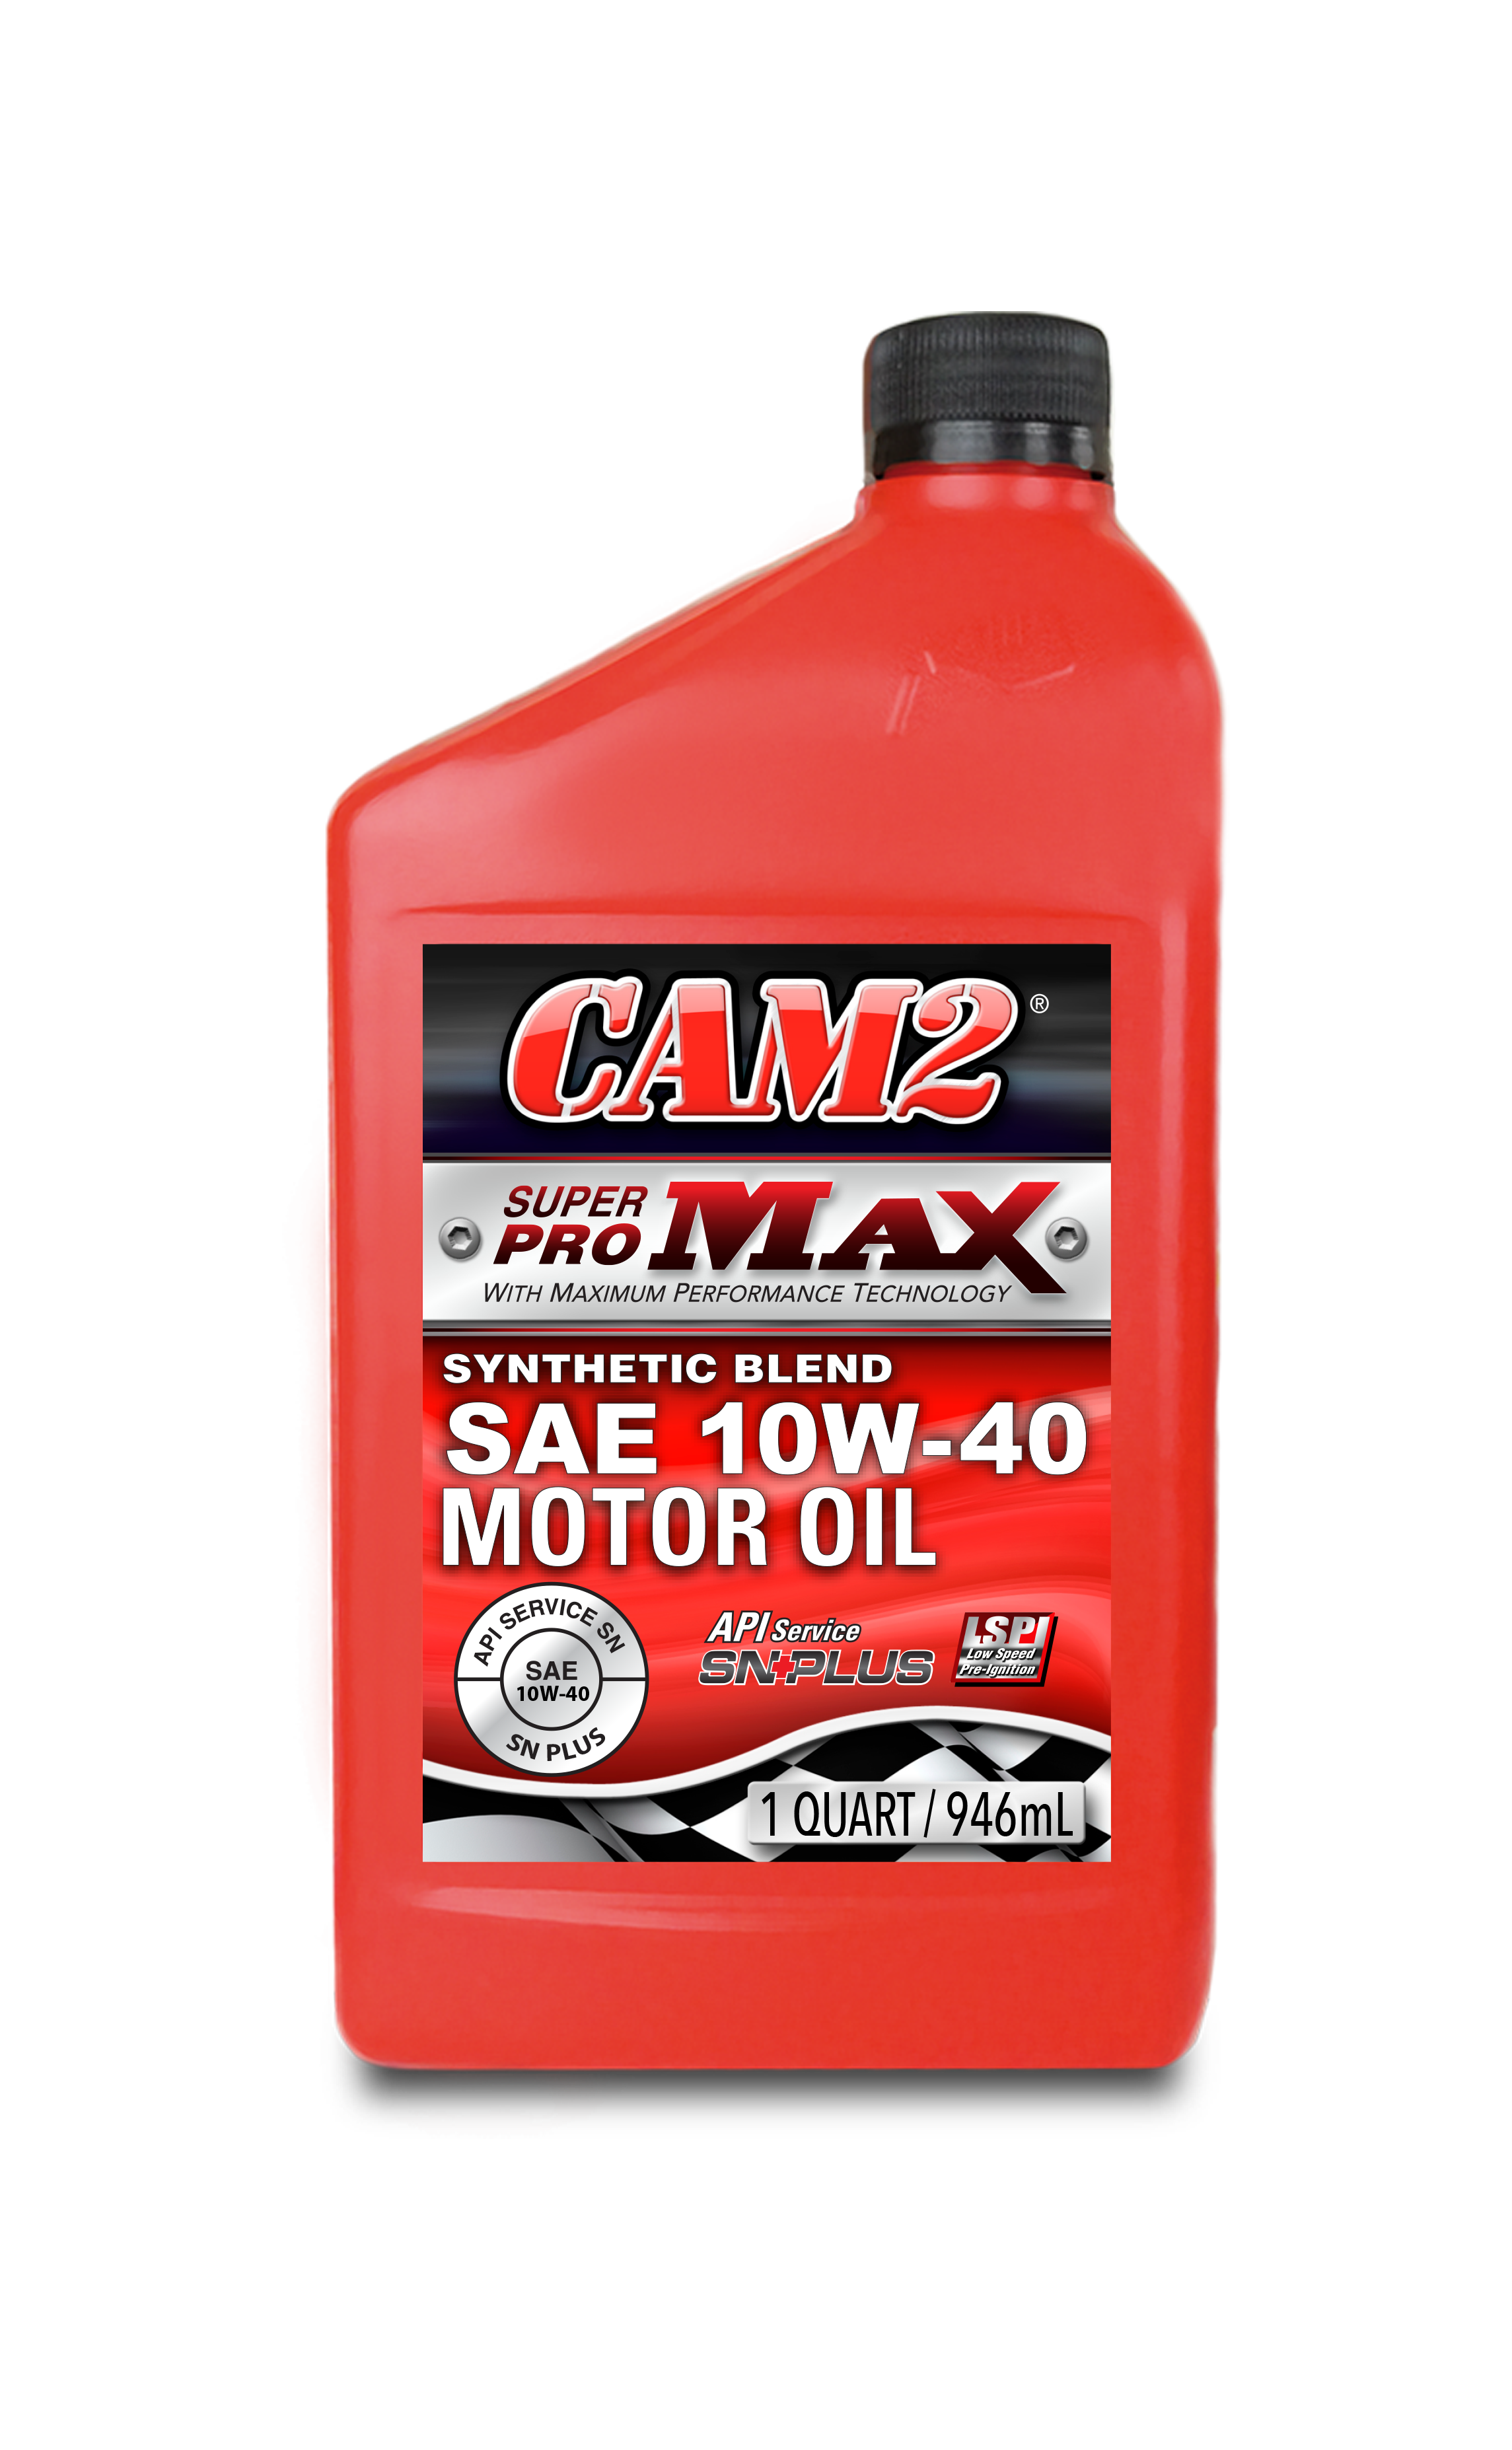 CAM2 SUPERPRO MAX 10W-40 SYNTHETIC BLEND MOTOR OIL 80565-416